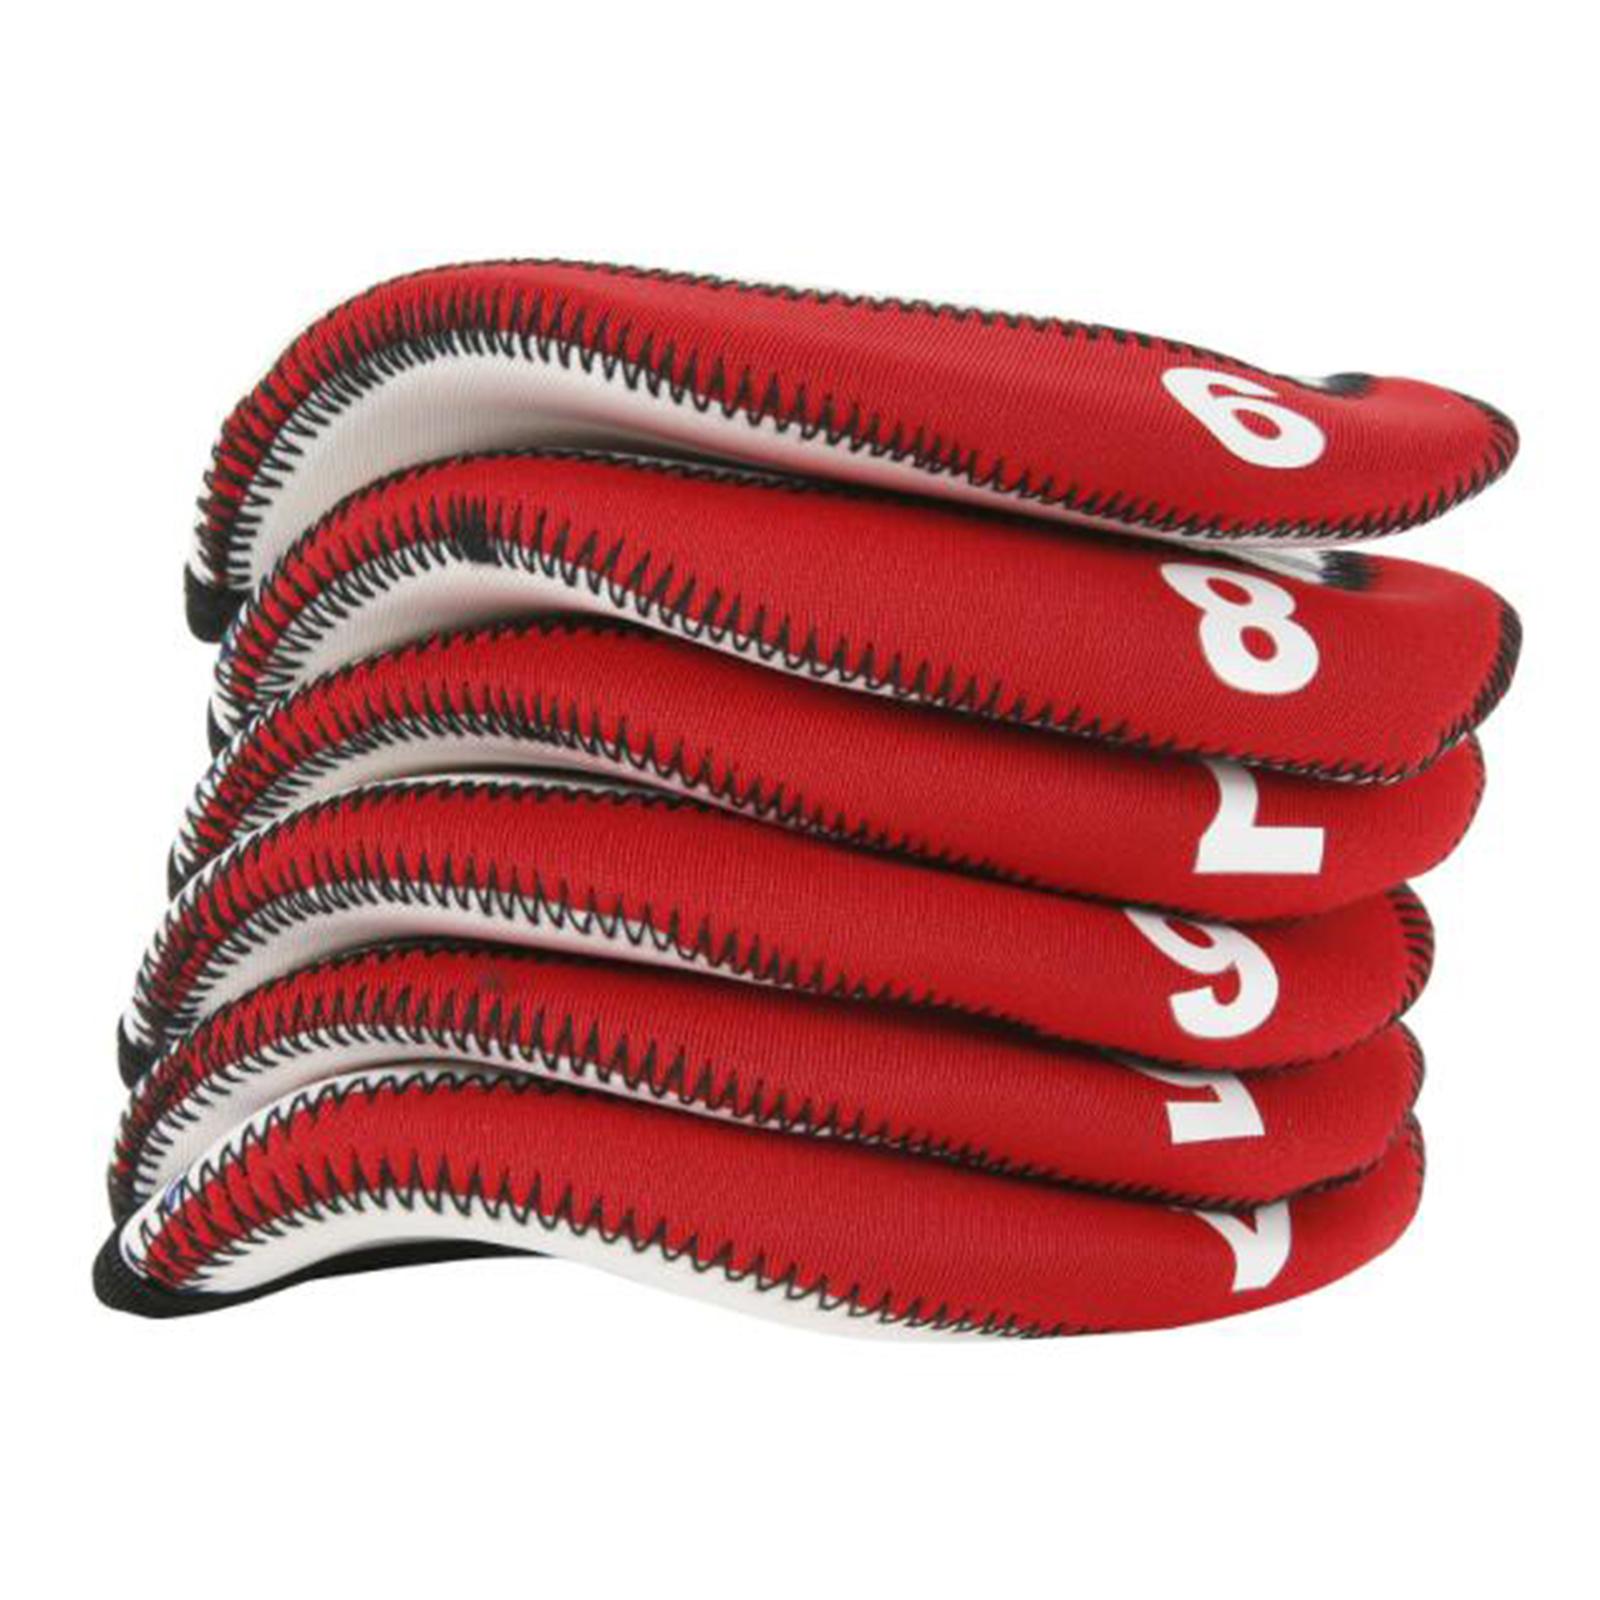 10x Golf Iron Headcover Set Golf Club Head Cover Golfer Gift Fits All Brands Red